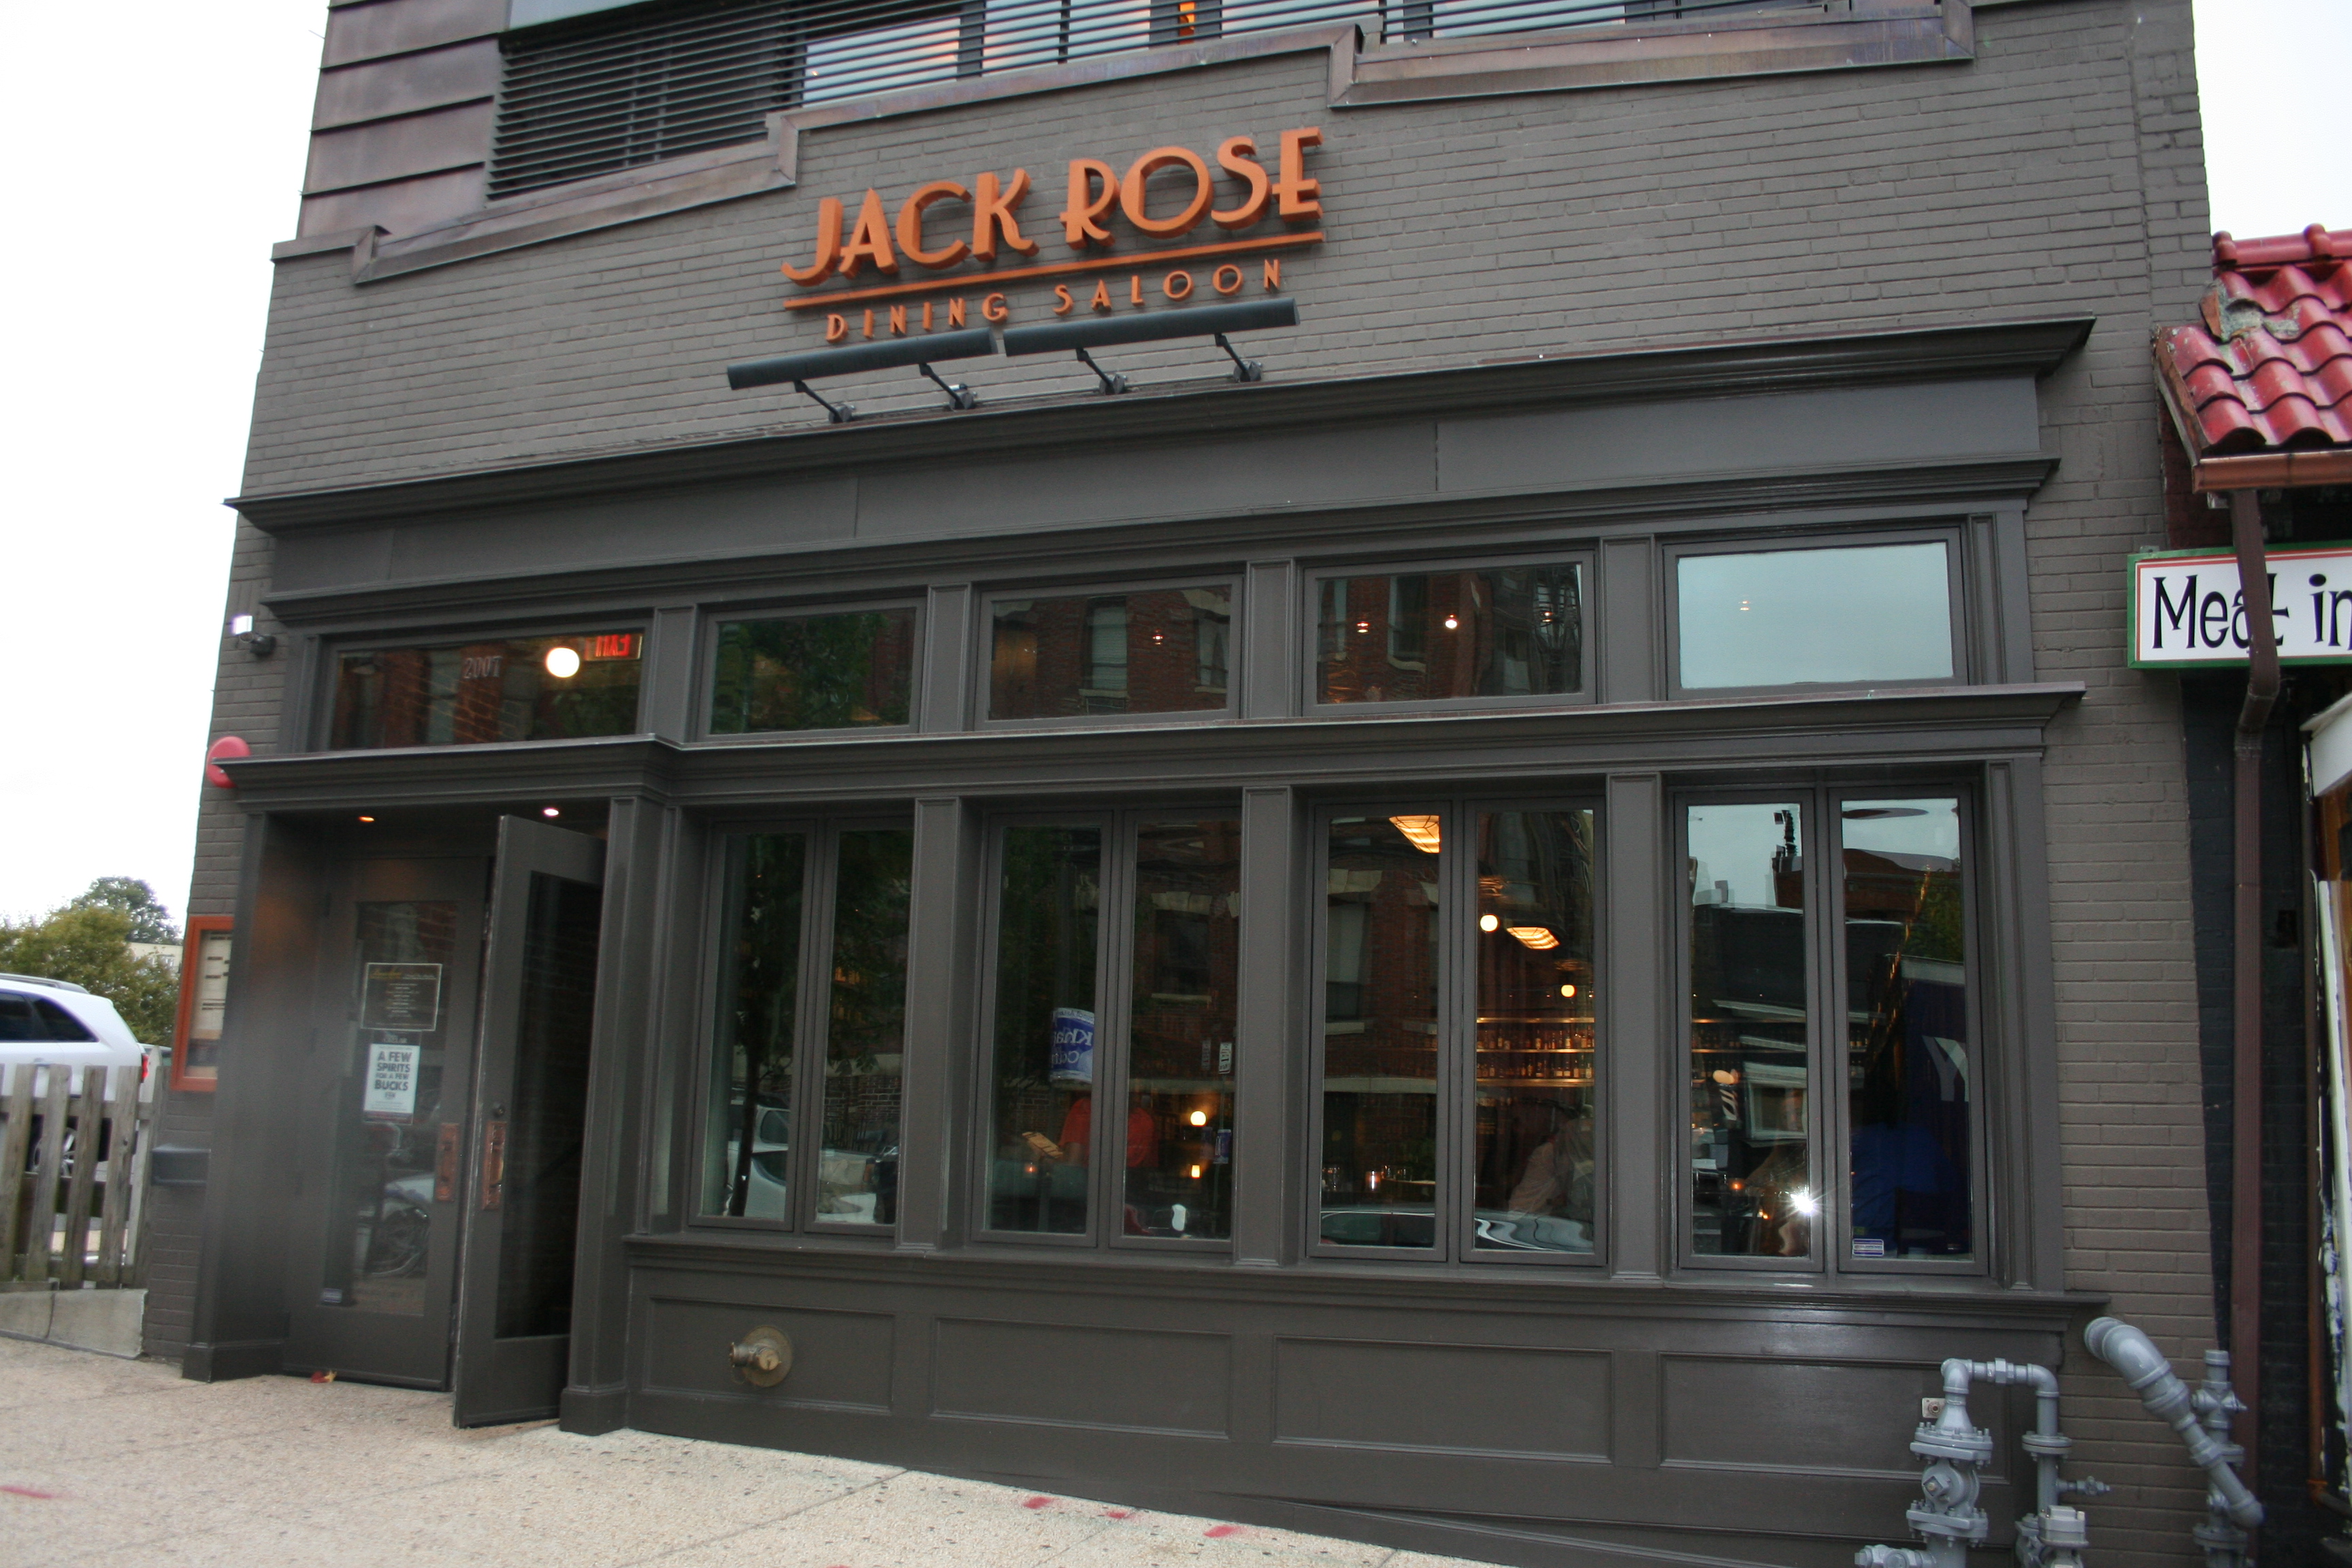 Jack Rose Dining Saloon will debut its new fall menu on Monday. (Photo: Mark Heckathorn/DC on Heels)